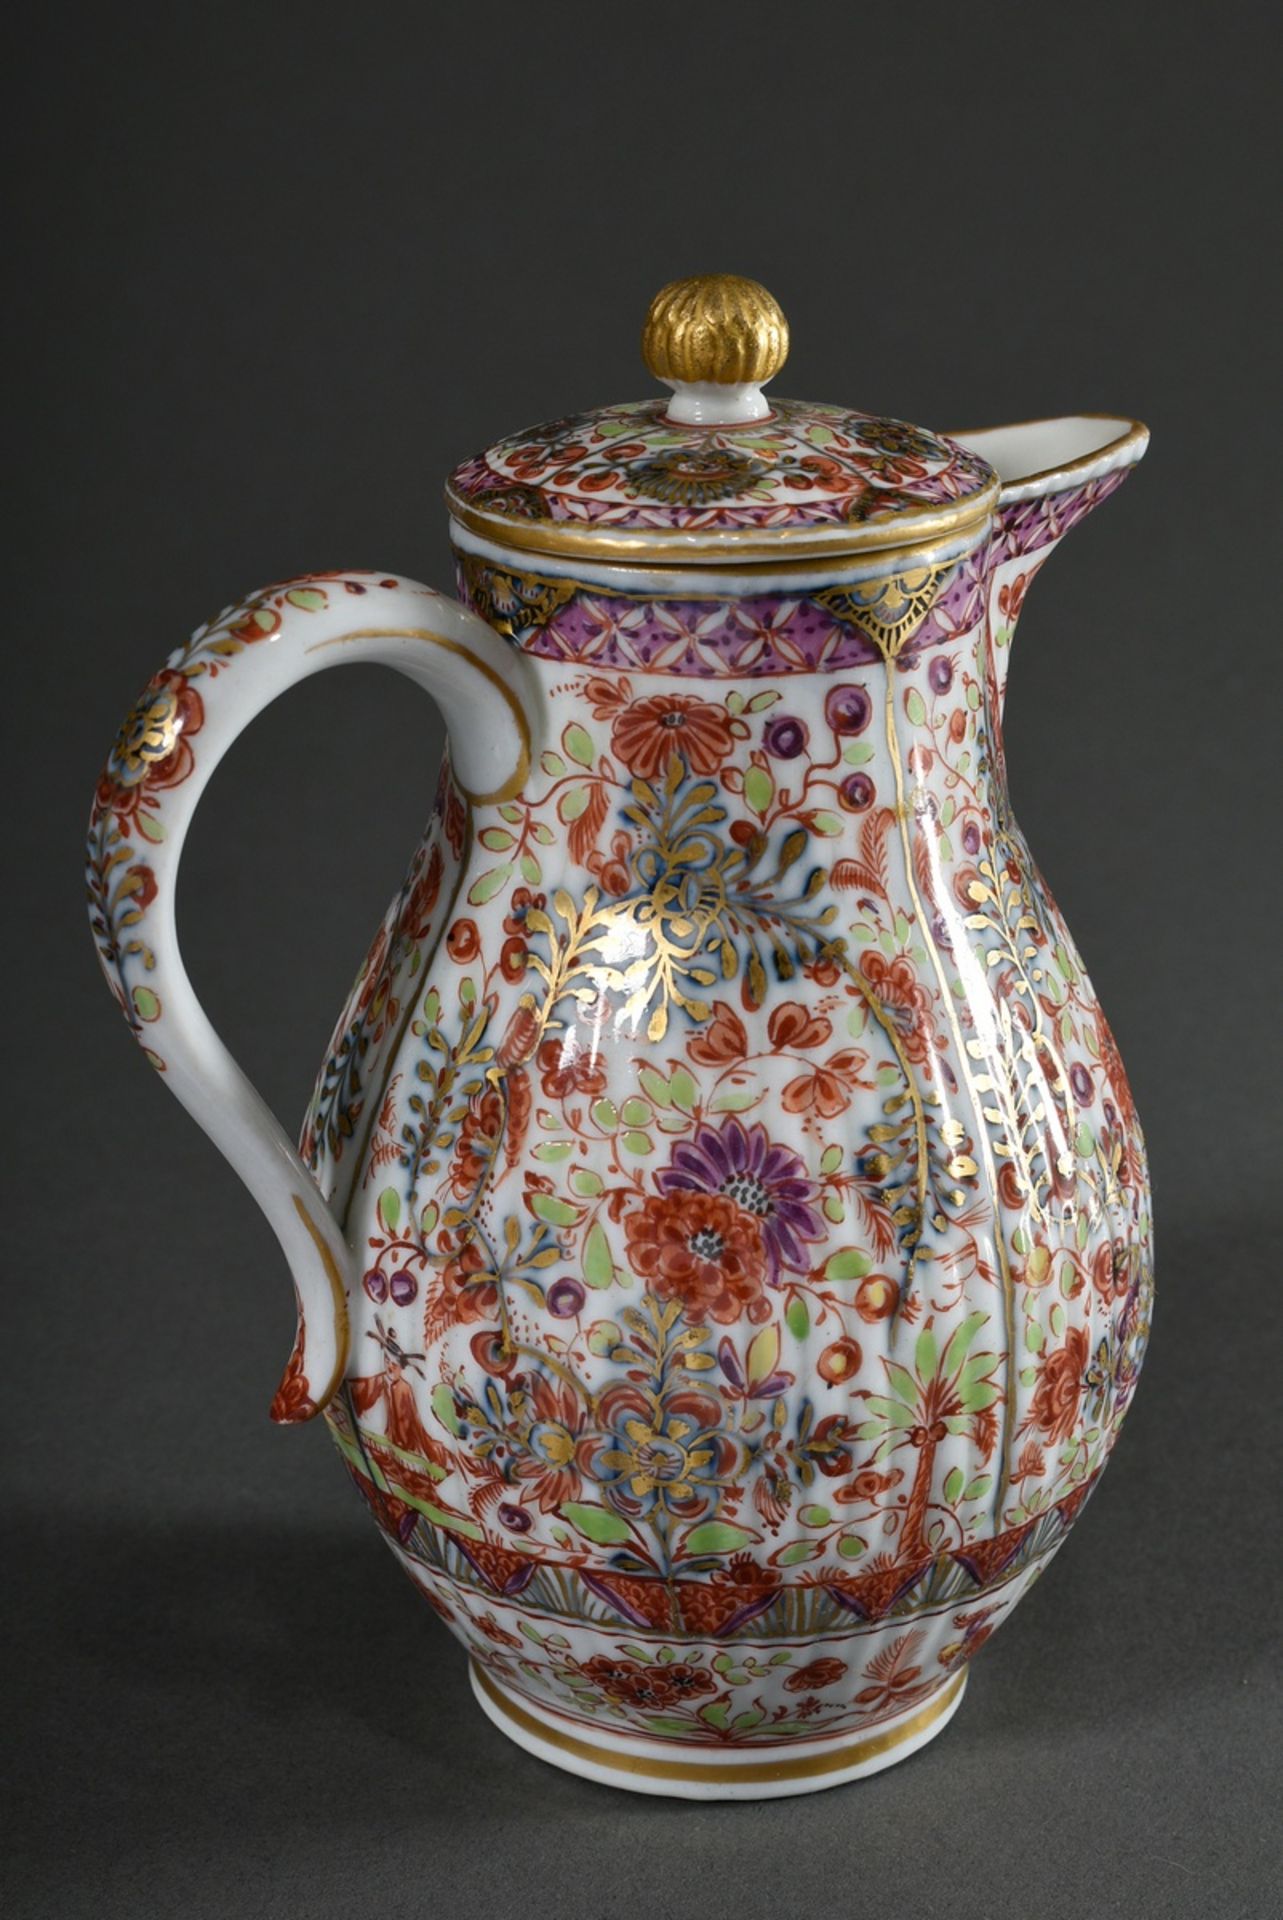 Small antique Meissen coffee-pot with opulent polychrome decoration "Indian Flower Painting" over b - Image 2 of 5